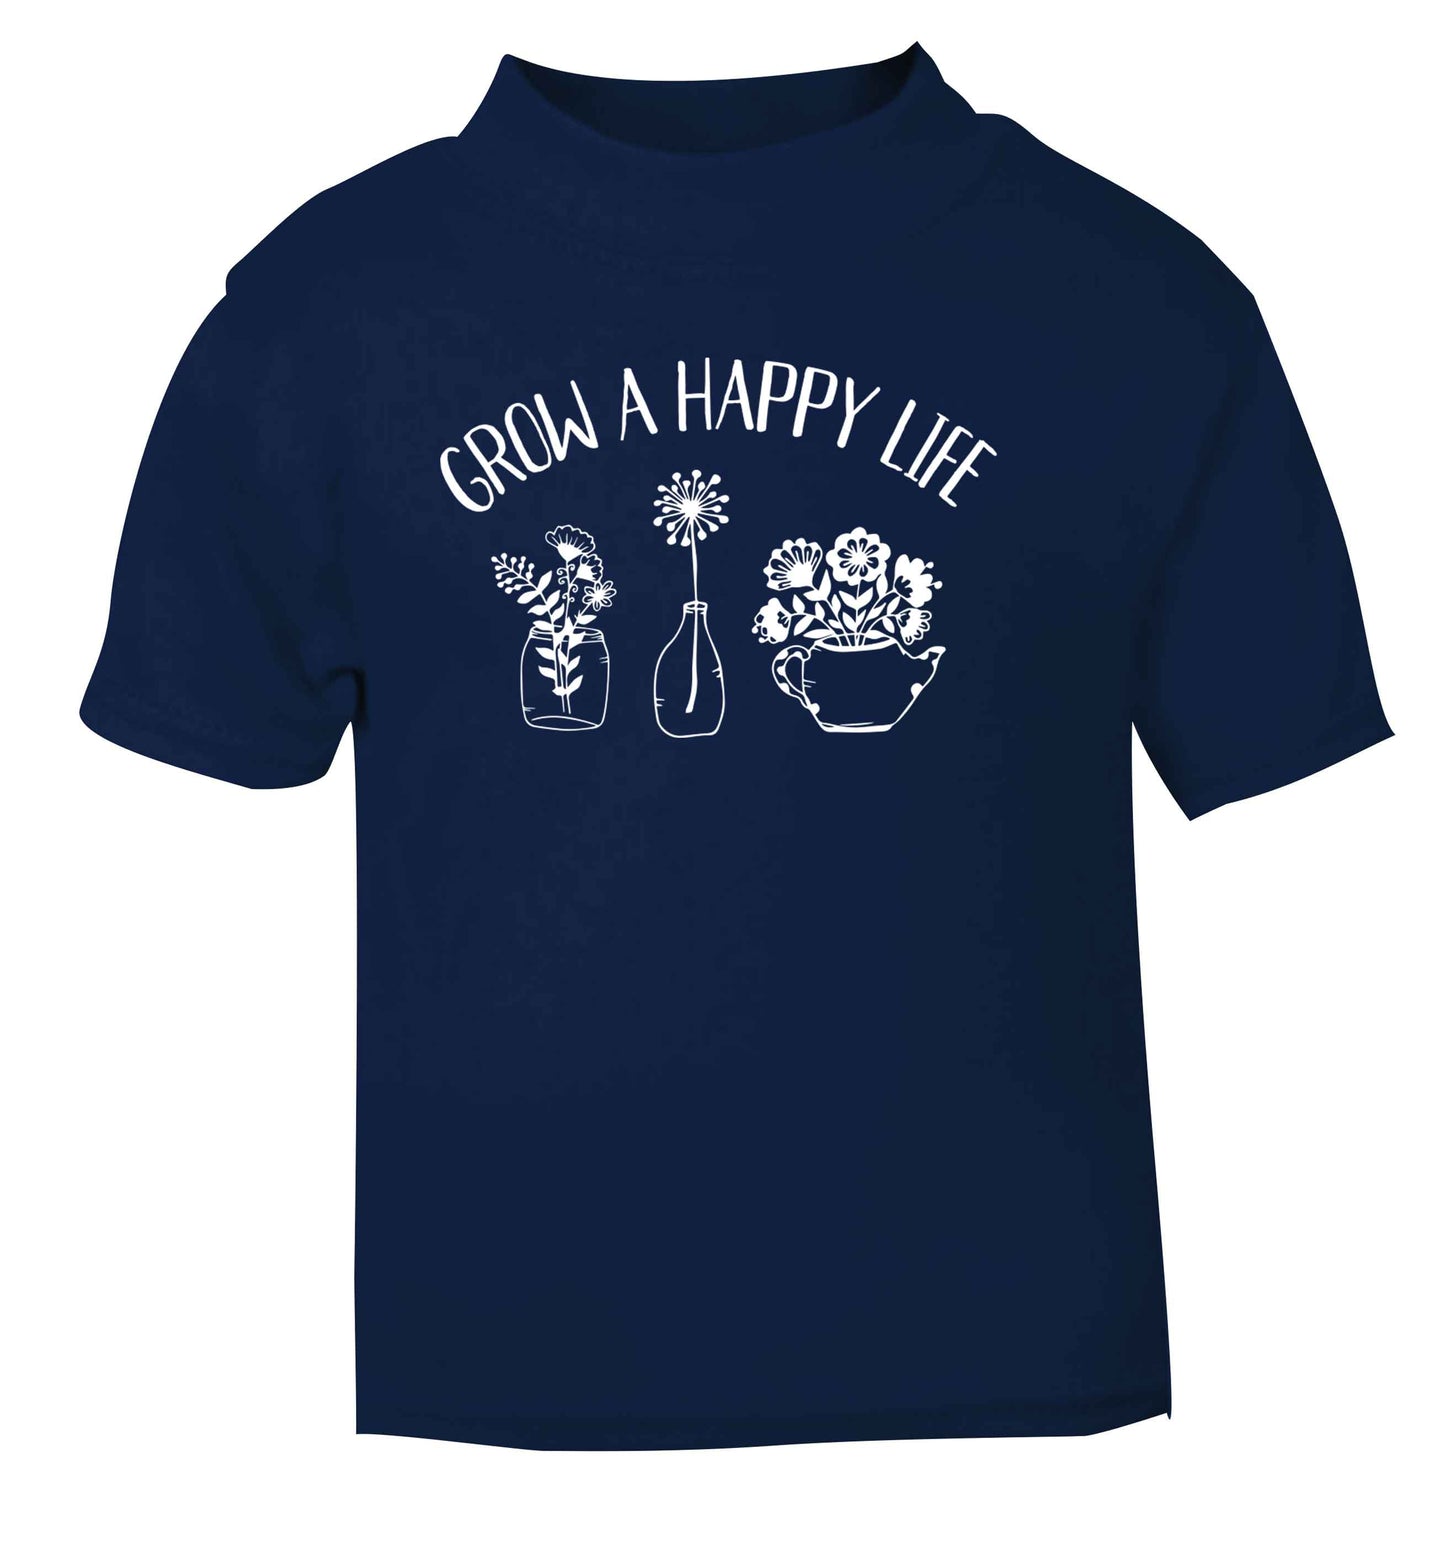 Grow a happy life navy Baby Toddler Tshirt 2 Years